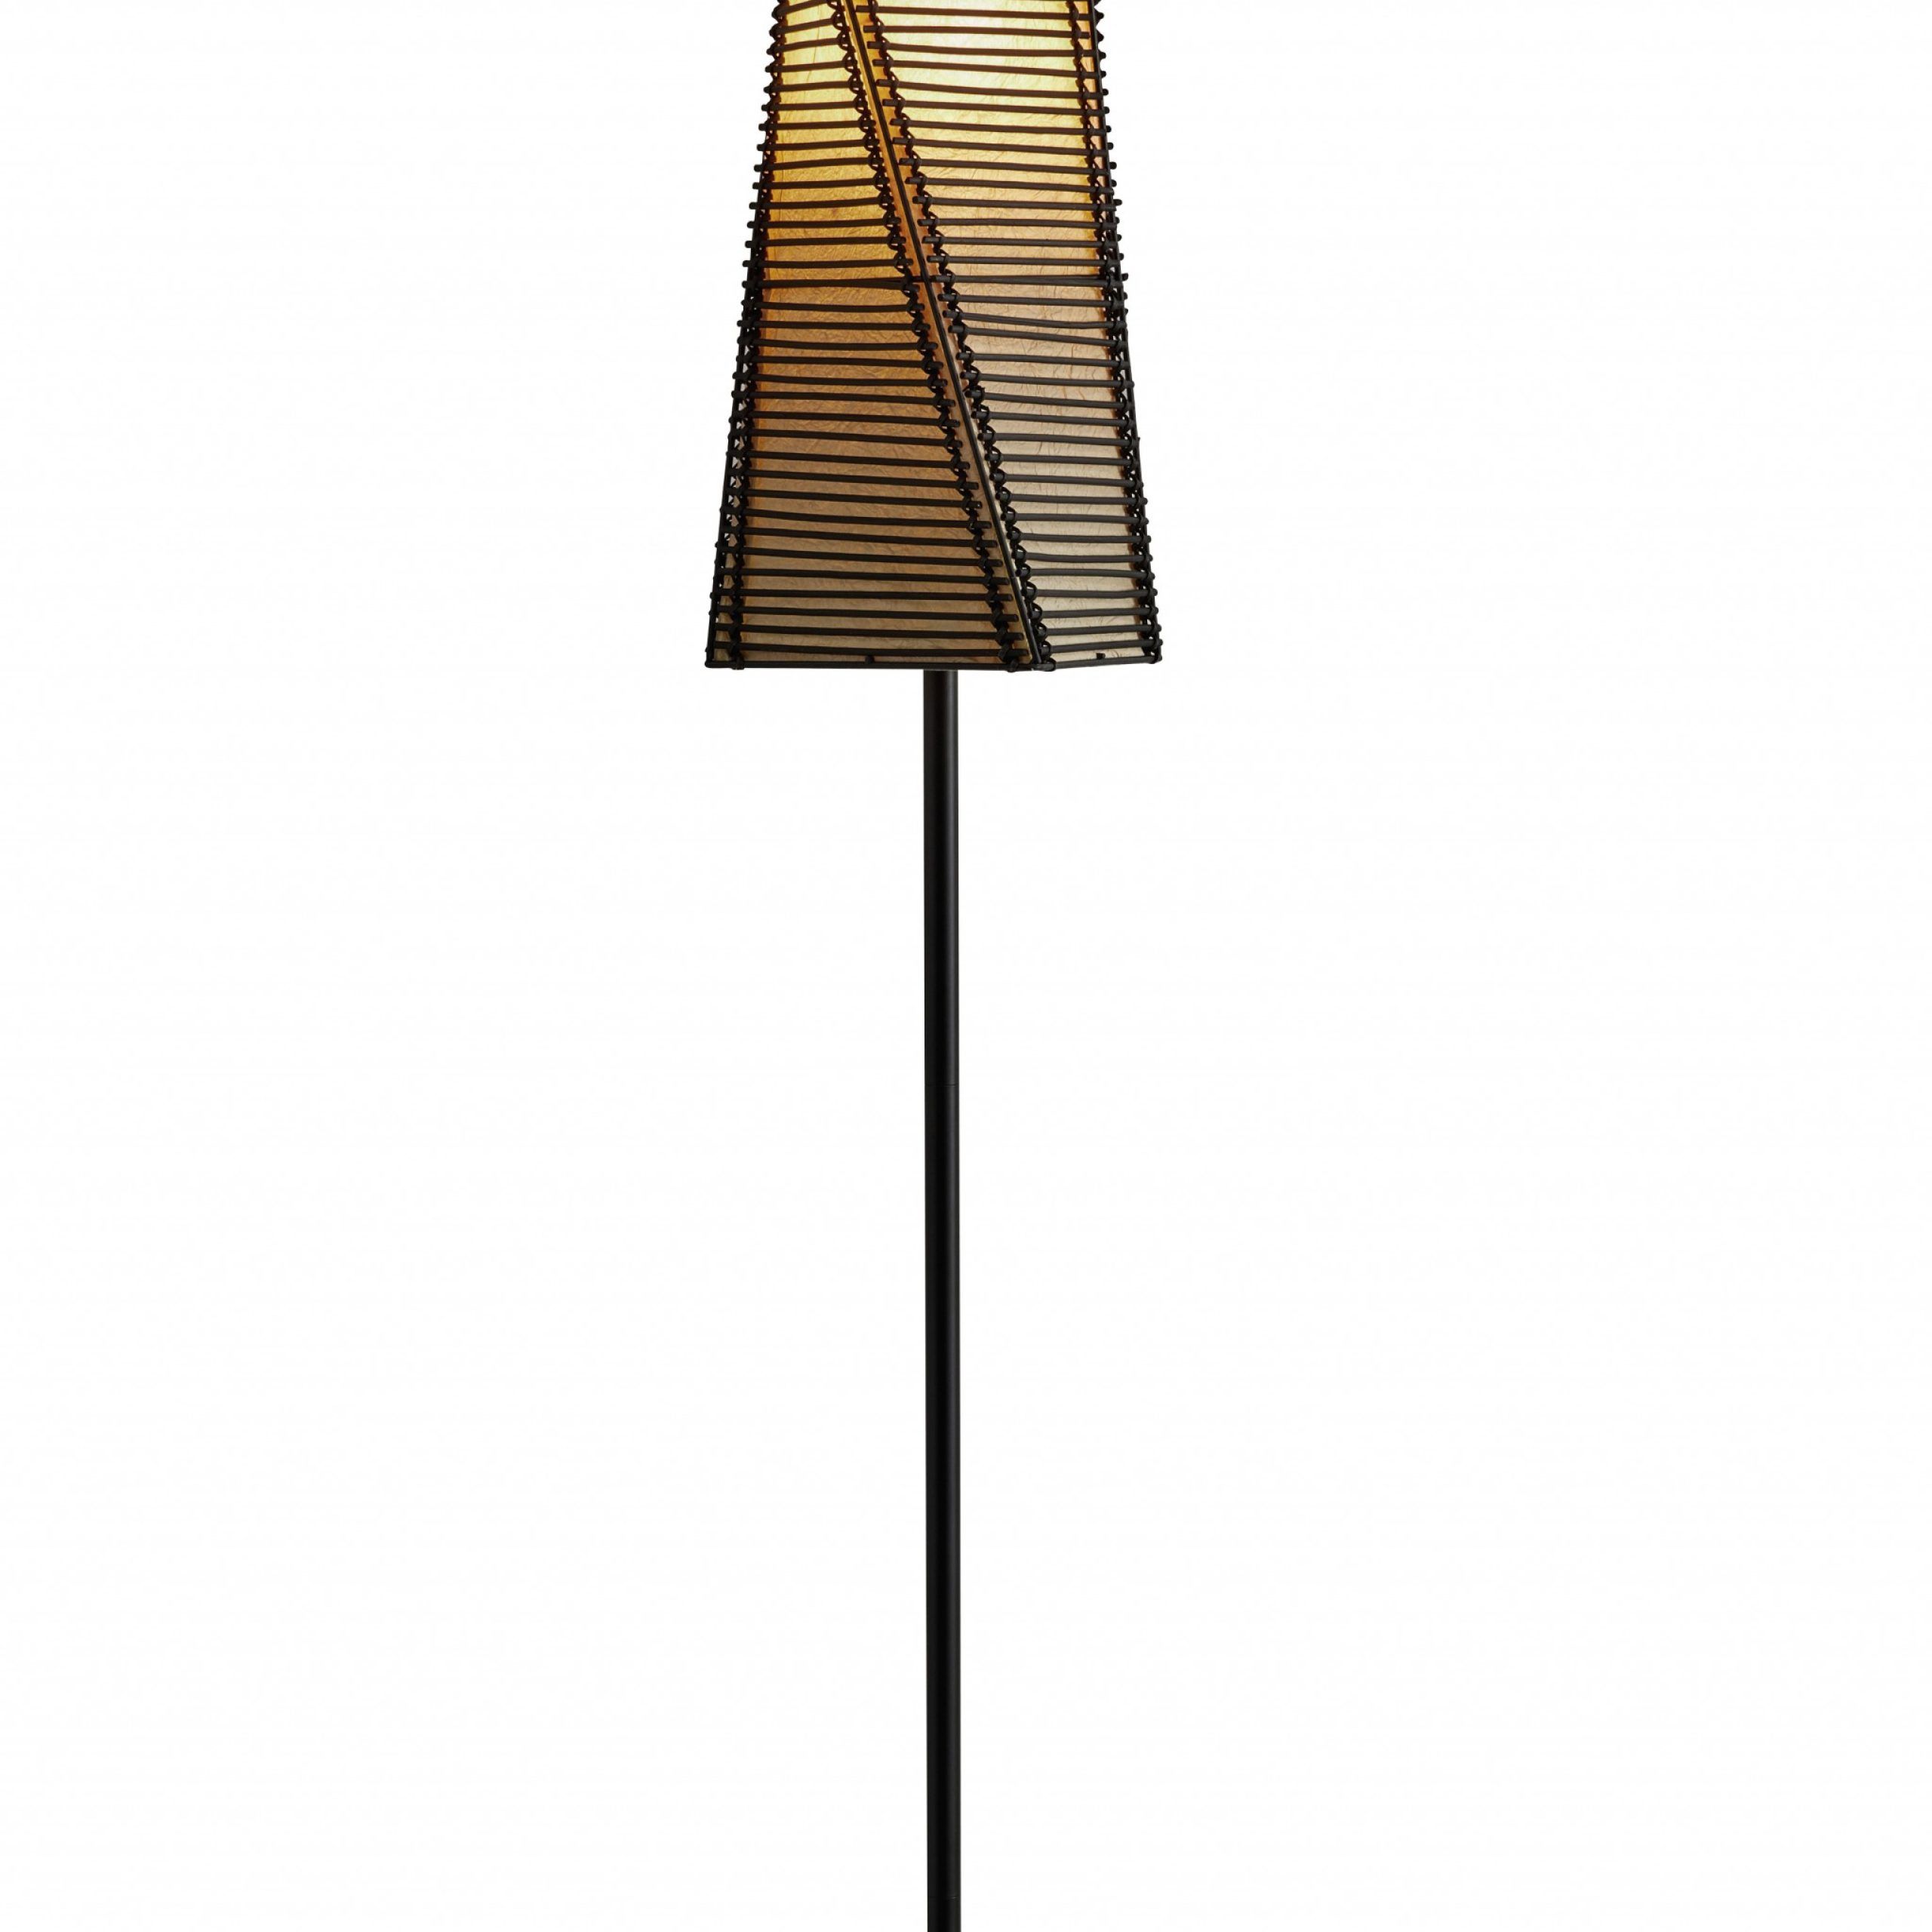 68" Black Novelty Floor Lamp With White Novelty Shade Regarding 68 Inch Floor Lamps (View 10 of 20)